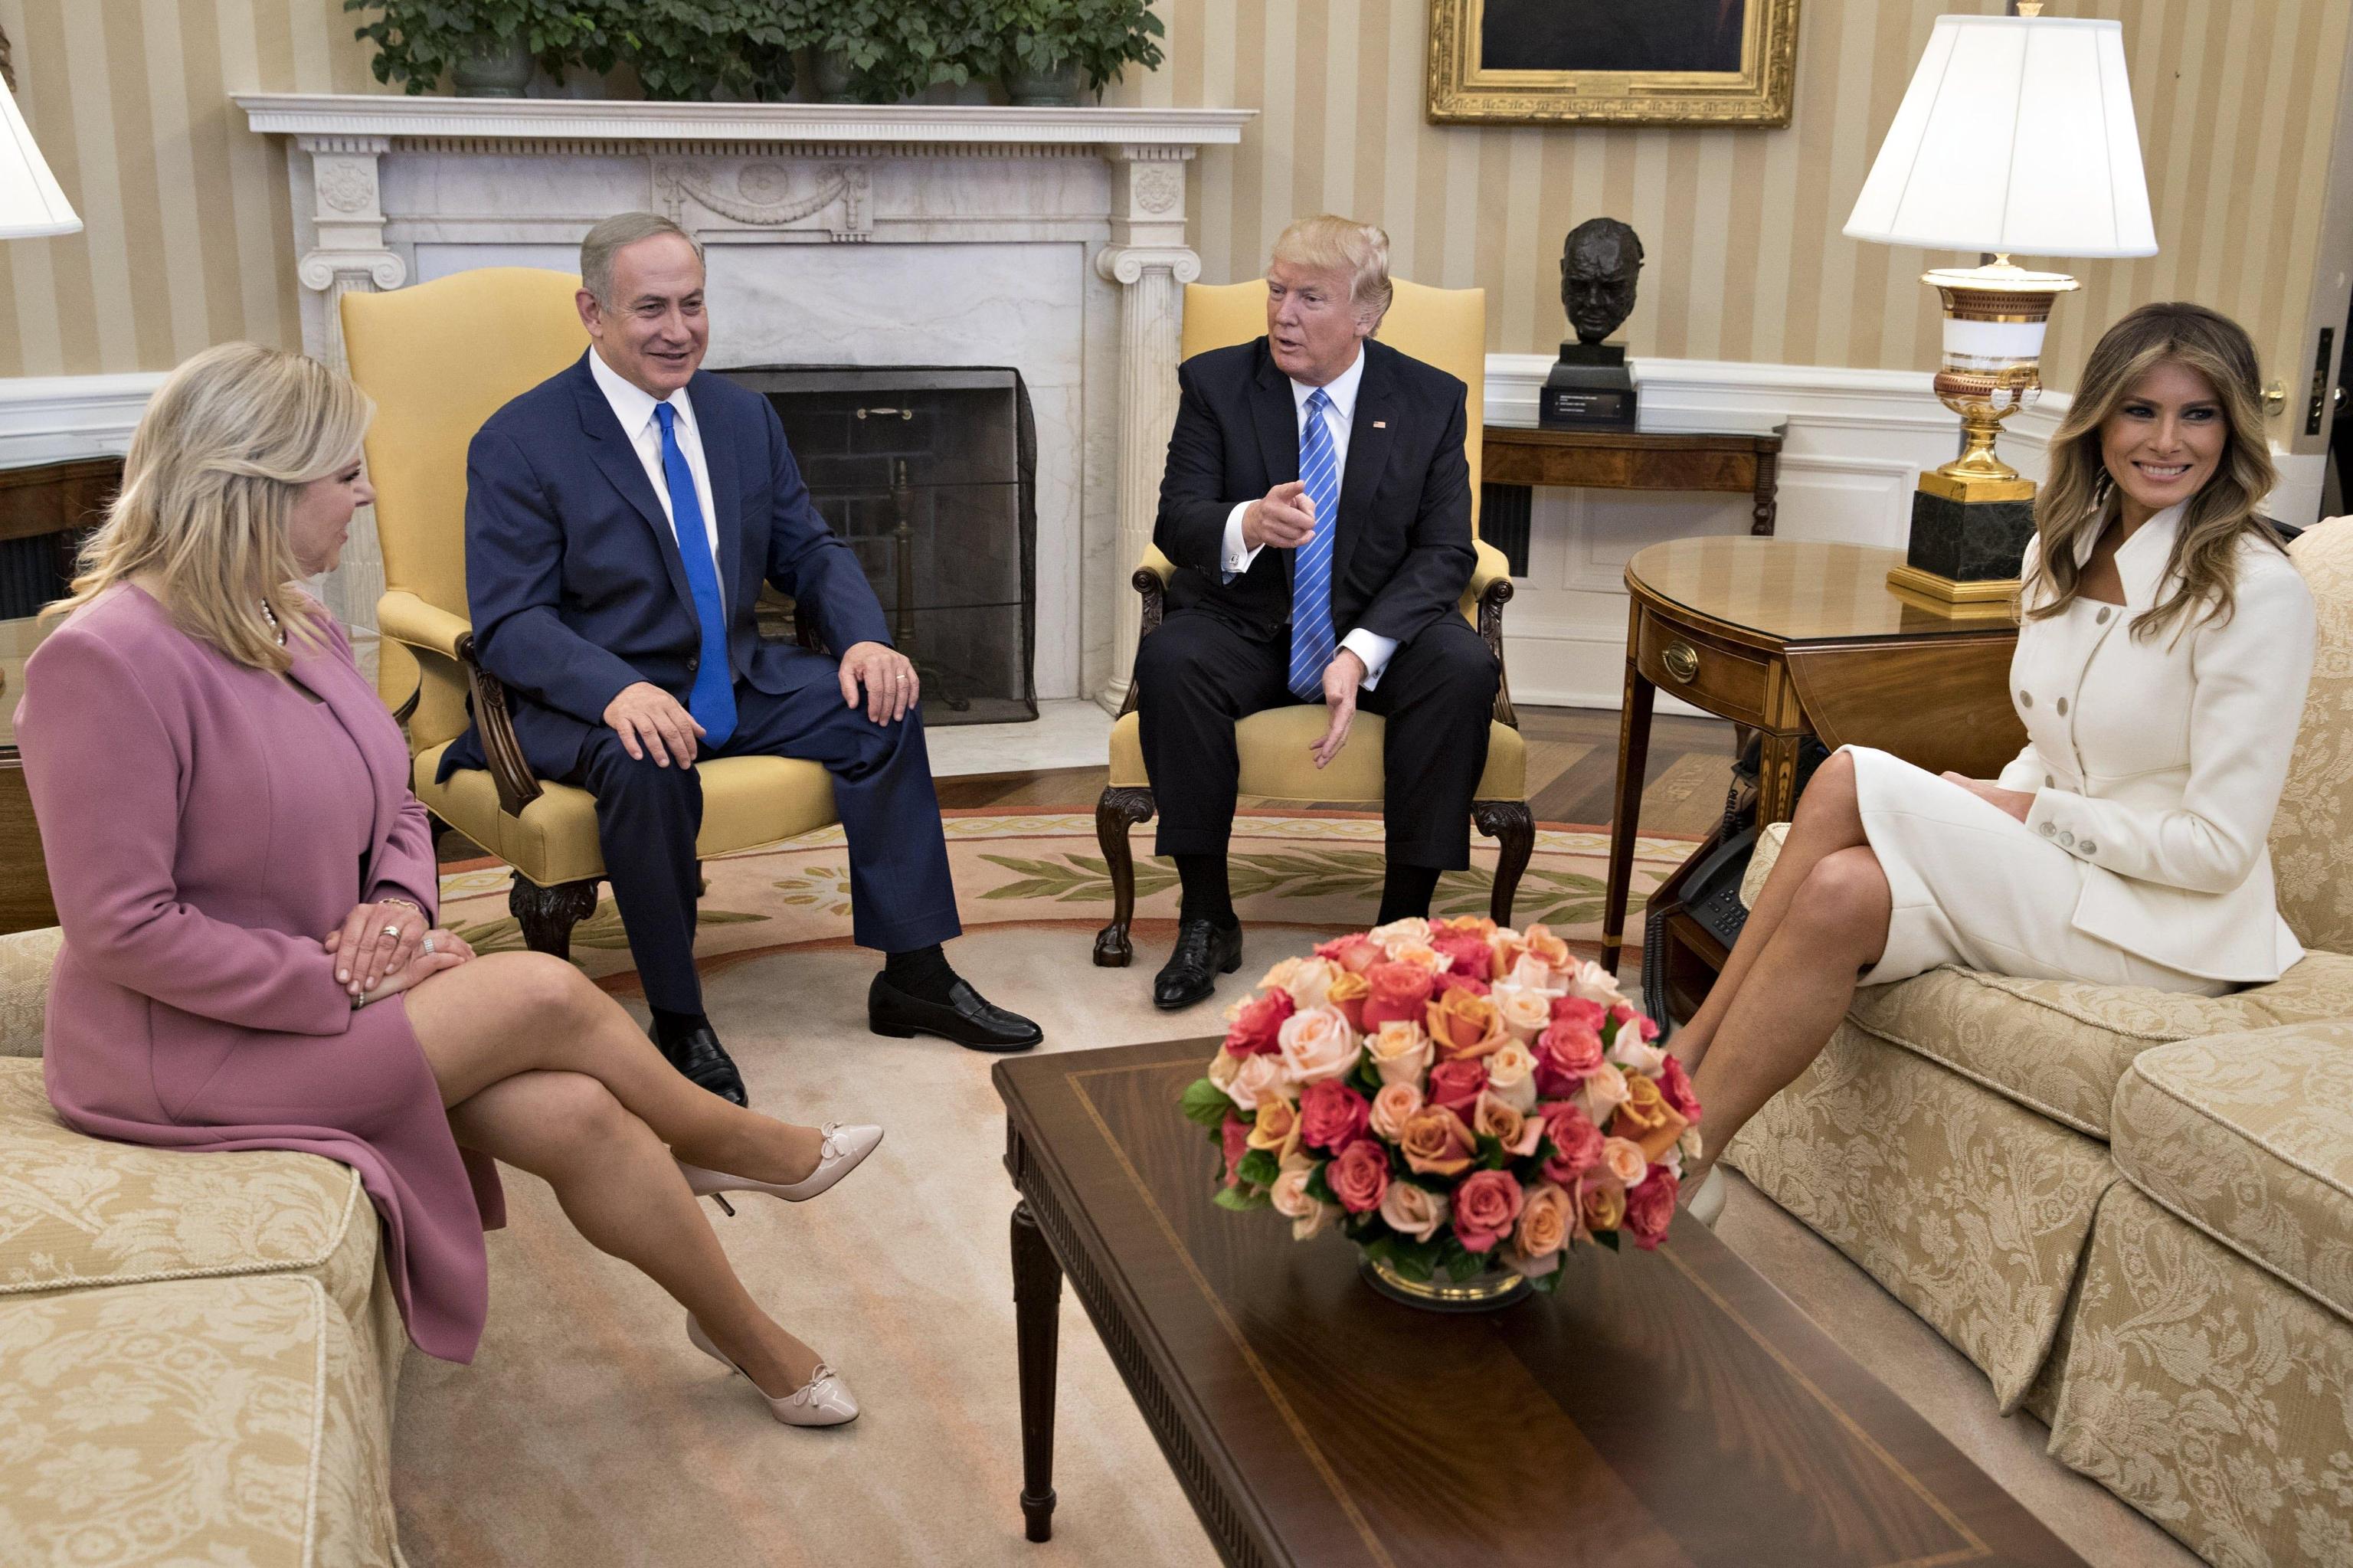 epa05795510 US First Lady Melania Trump, from right, US President Donald J. Trump, Benjamin Netanyahu, Israel's prime minister, and his wife Sara Netanyahu sit in the Oval Office of the White House in Washington, DC, USA, on 15 February 2017. EPA/Andrew Harrer / POOL